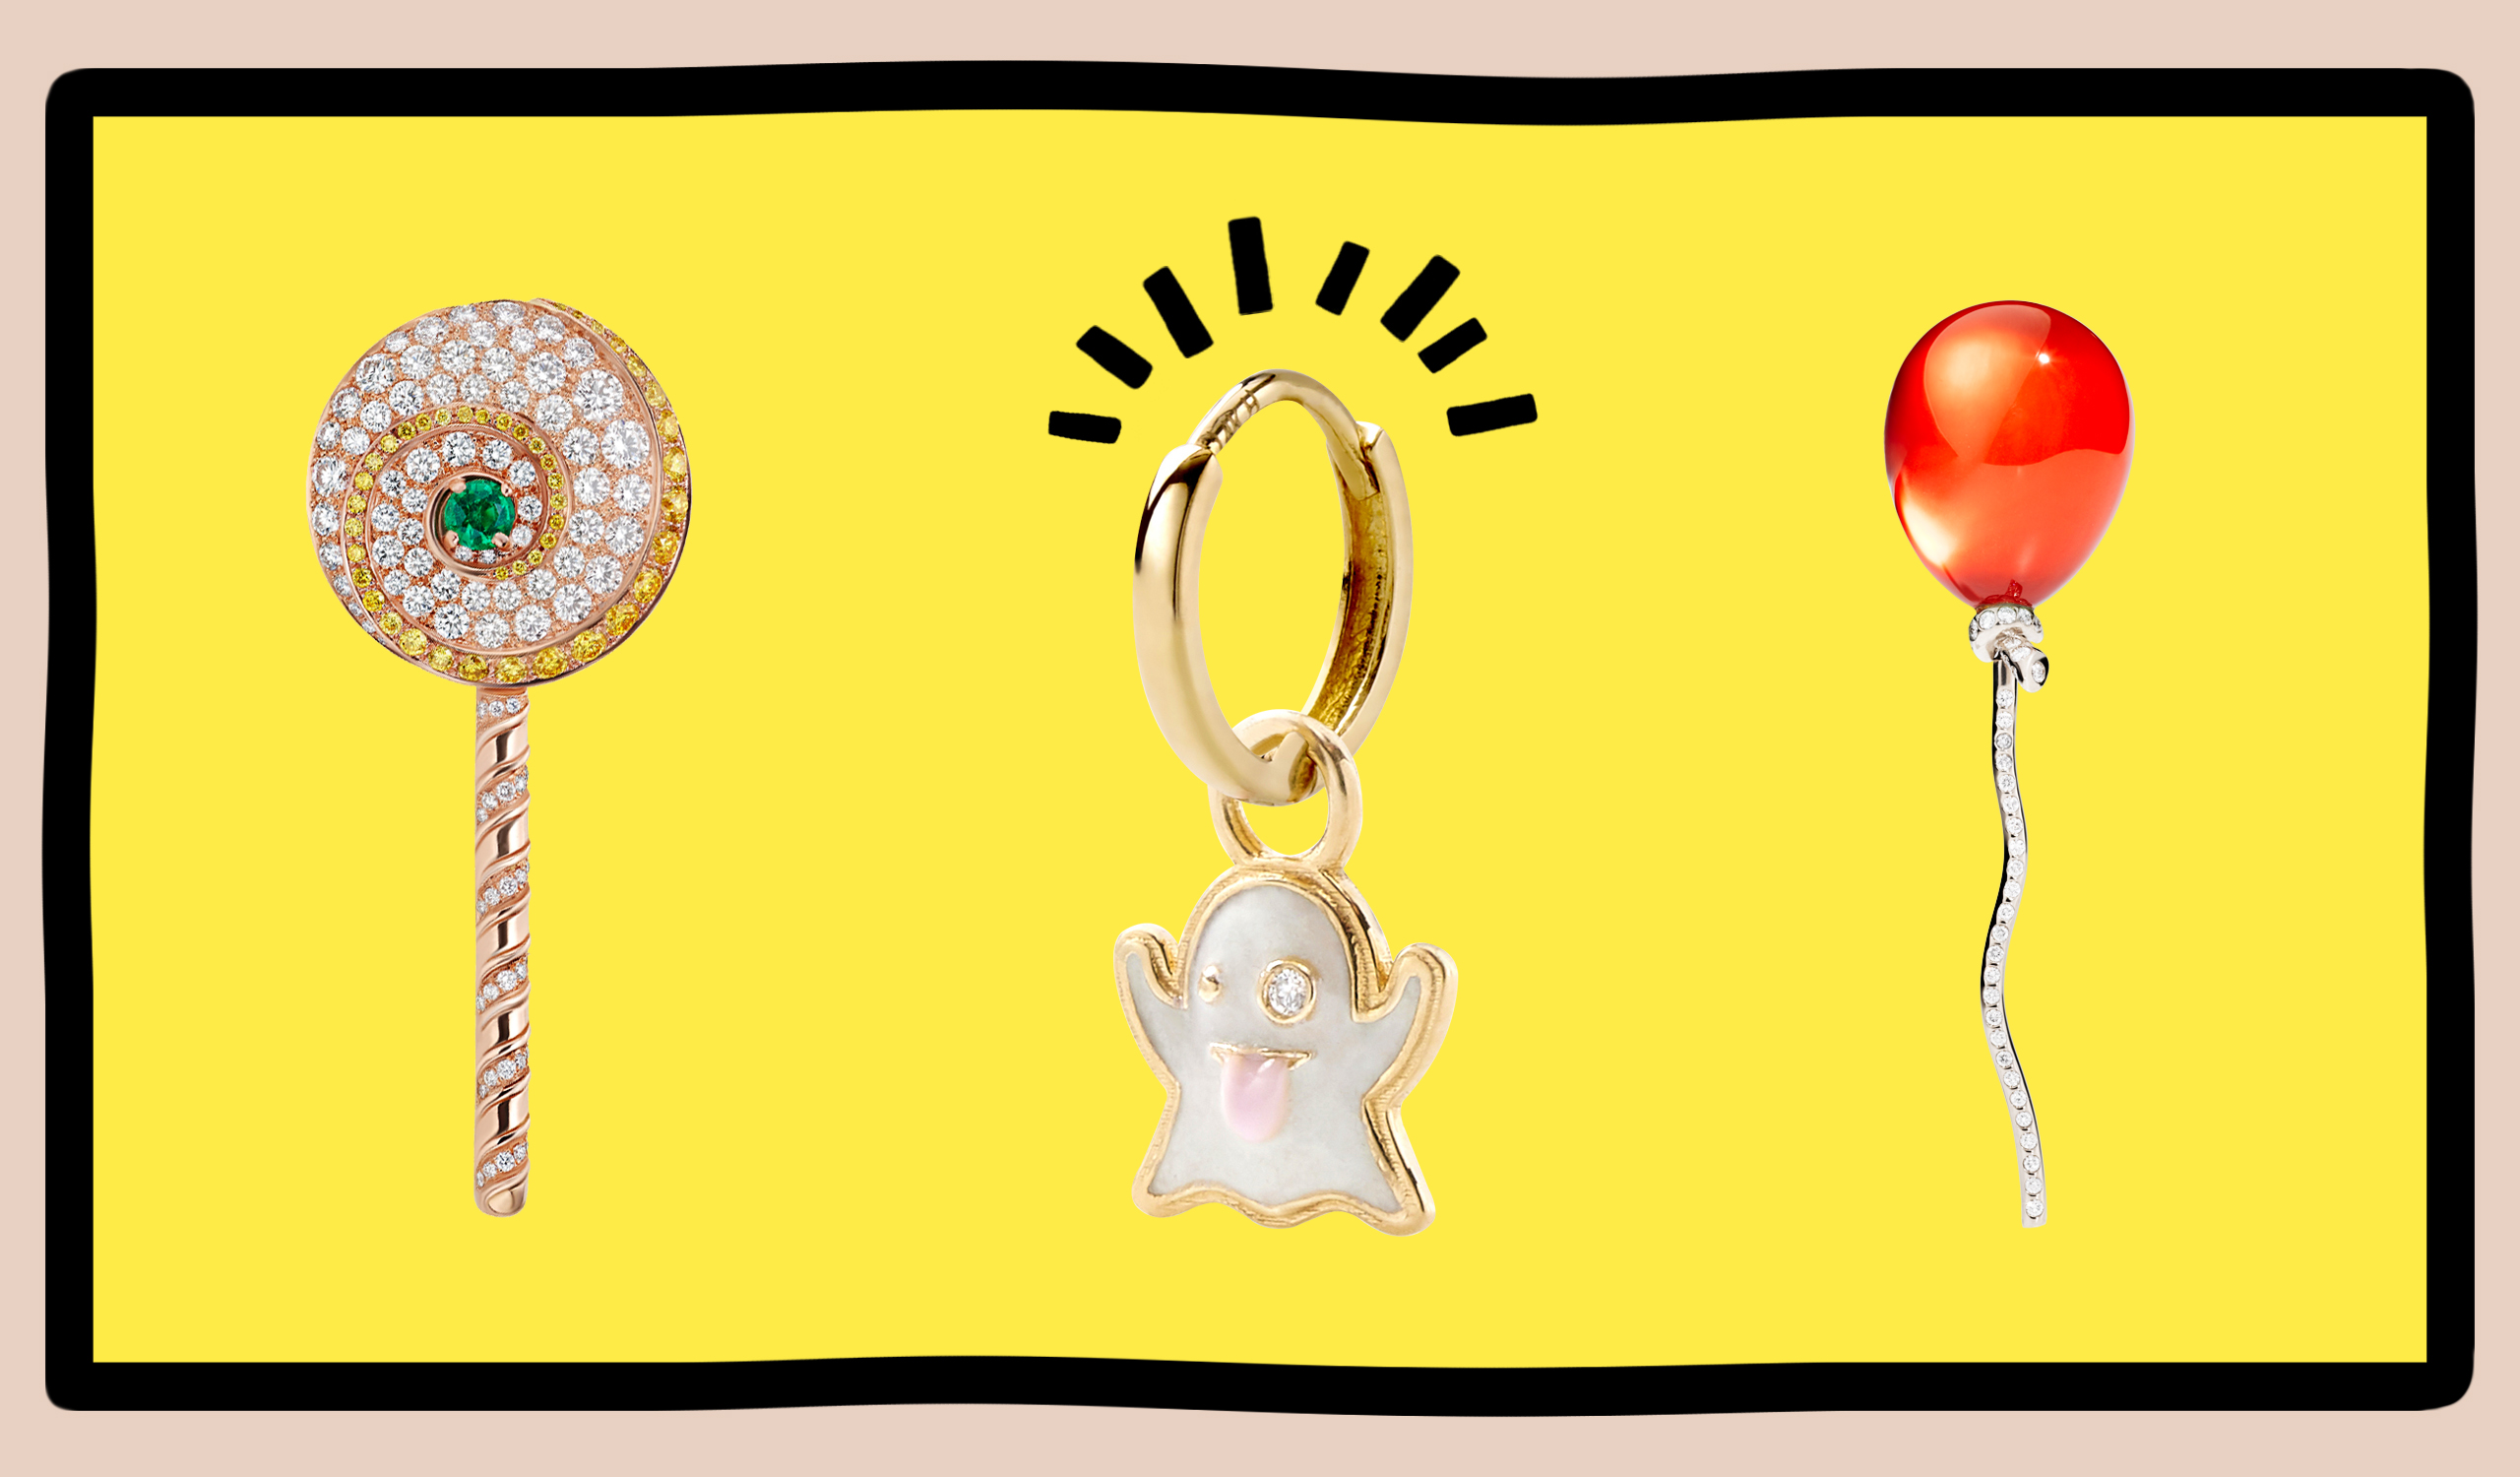 Round cut & pave diamonds within lollipop, ghost, and balloon emoji jewelry pendants from Bulgari, Alison Lou, and Vhernier